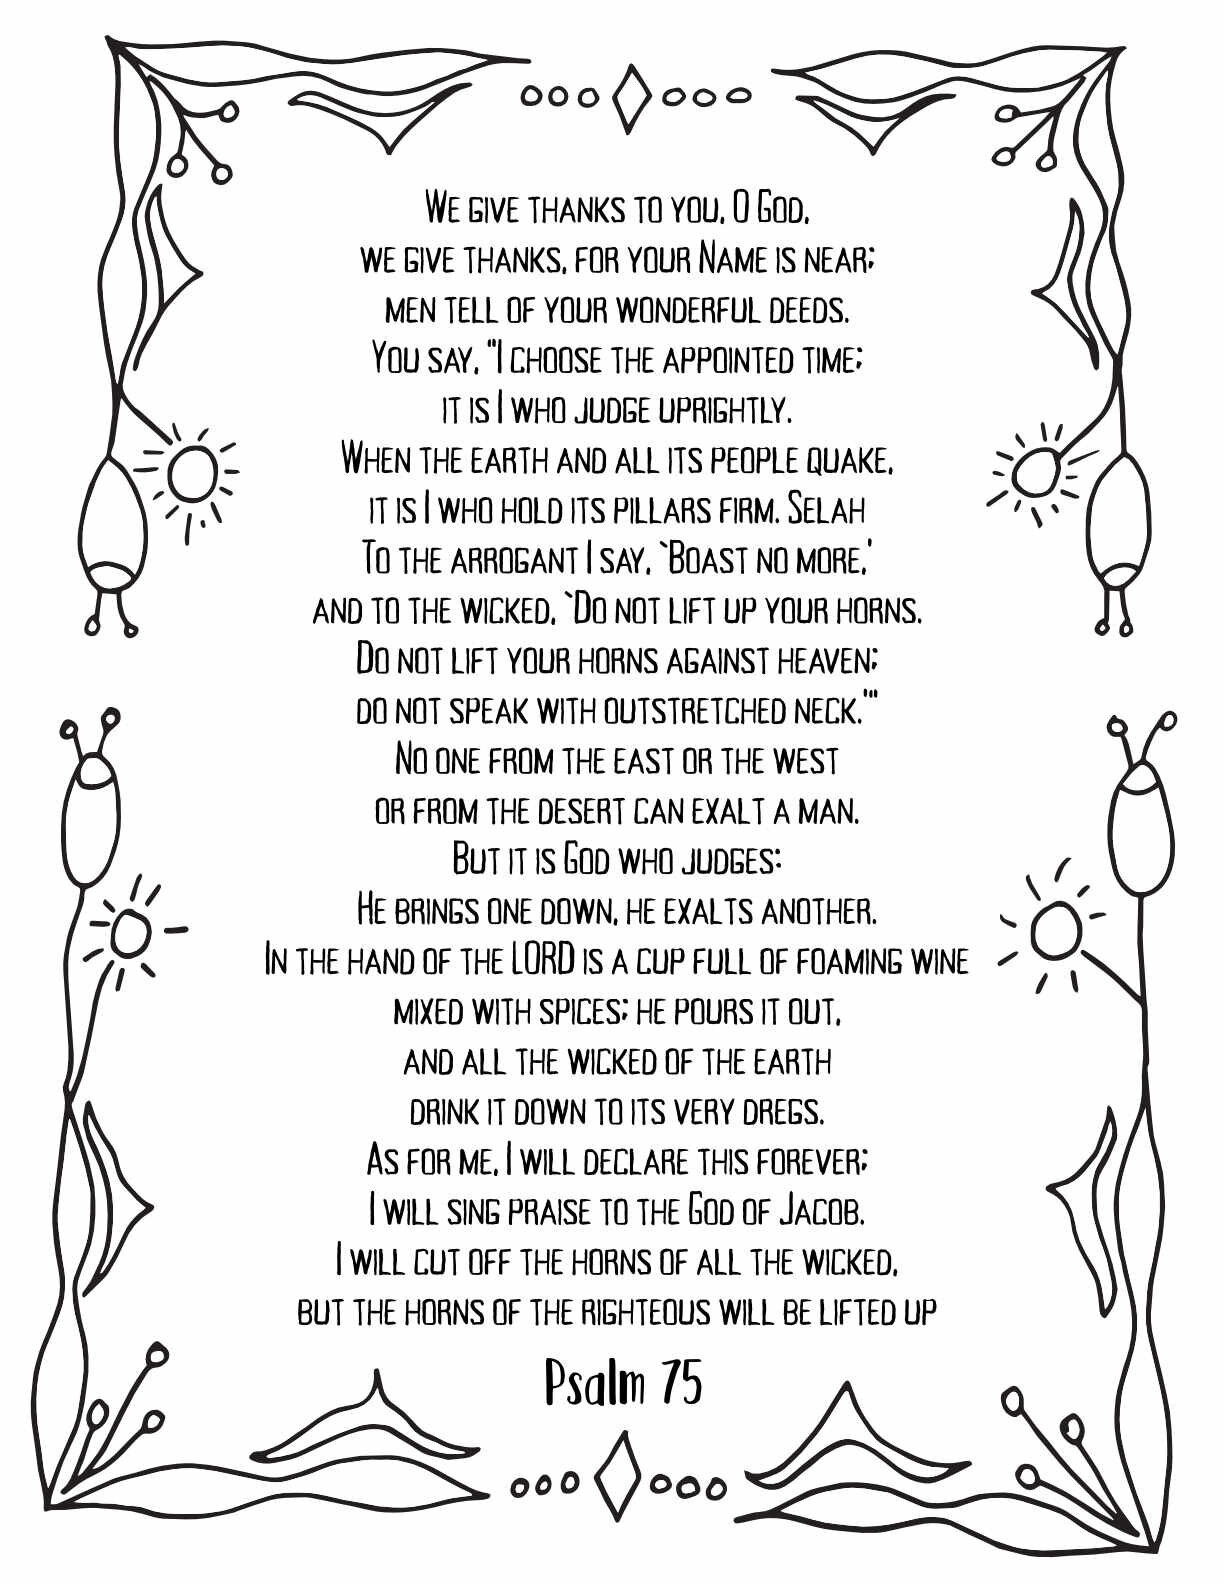 10 Free Printable Psalm Coloring Pages - Download and Color Adult Scripture - Psalm 75CLICK HERE TO DOWNLOAD THIS PAGE FREE